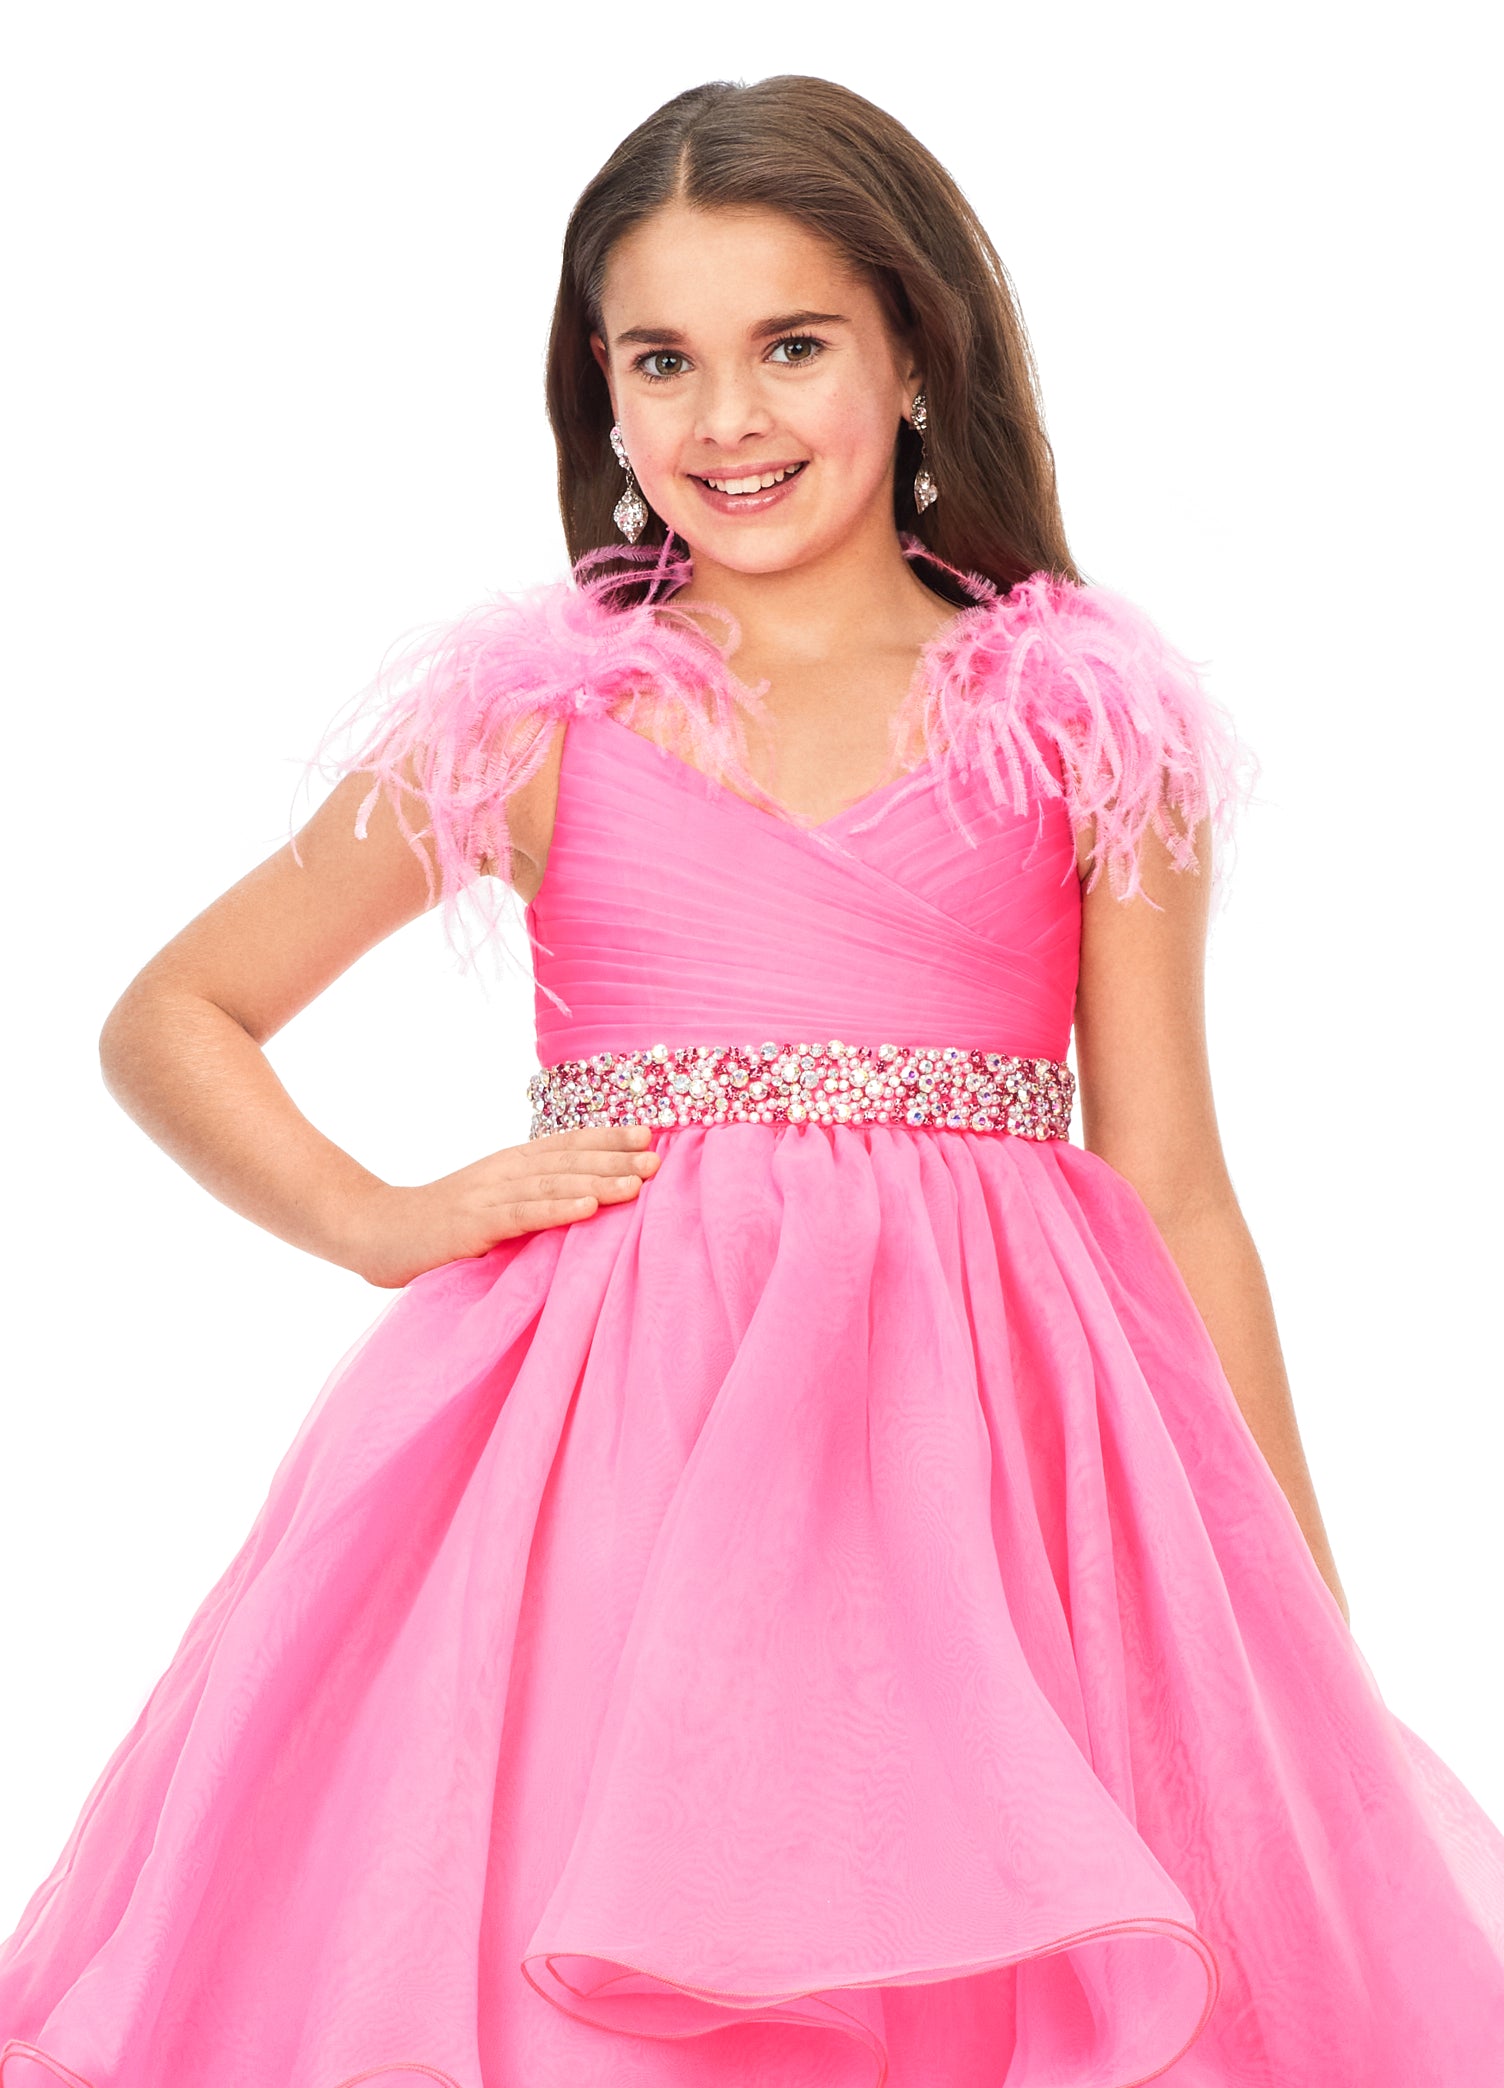 Ashley Lauren Kids 8184 Girls Pageant Dress Ball Gown with Feather Details  This organza kids ball gown features feather shoulders cascading to a crystal encrusted waistline. The layered skirt completes the look.